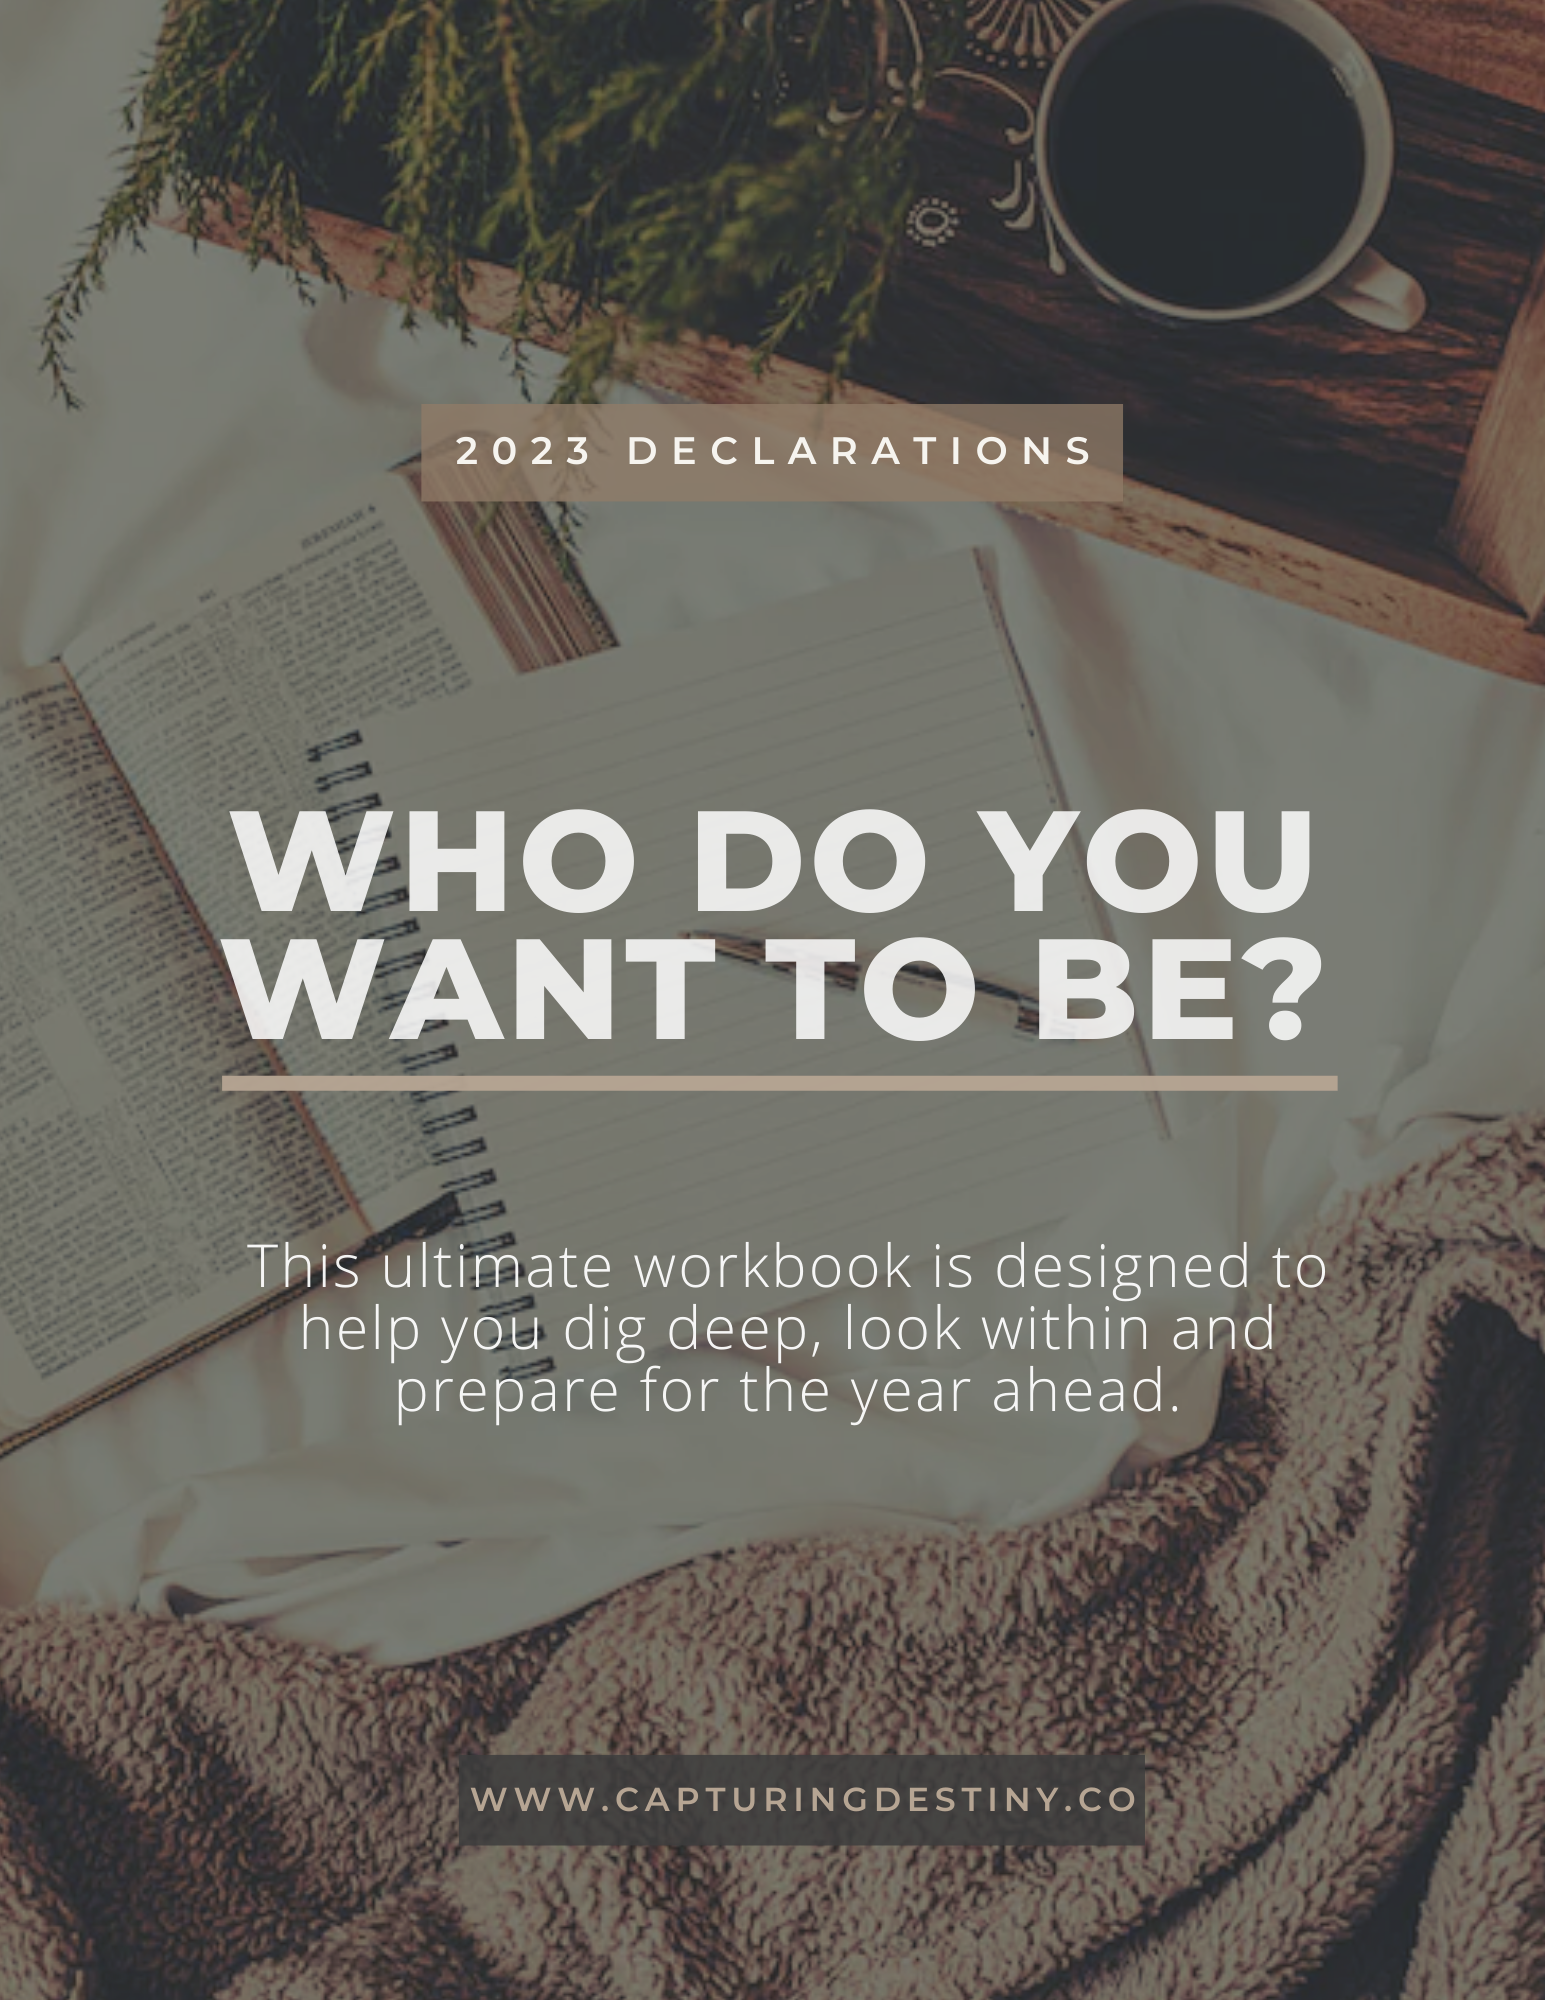 Download your 2023 workbook to pray, plan and prepare for the year ahead!